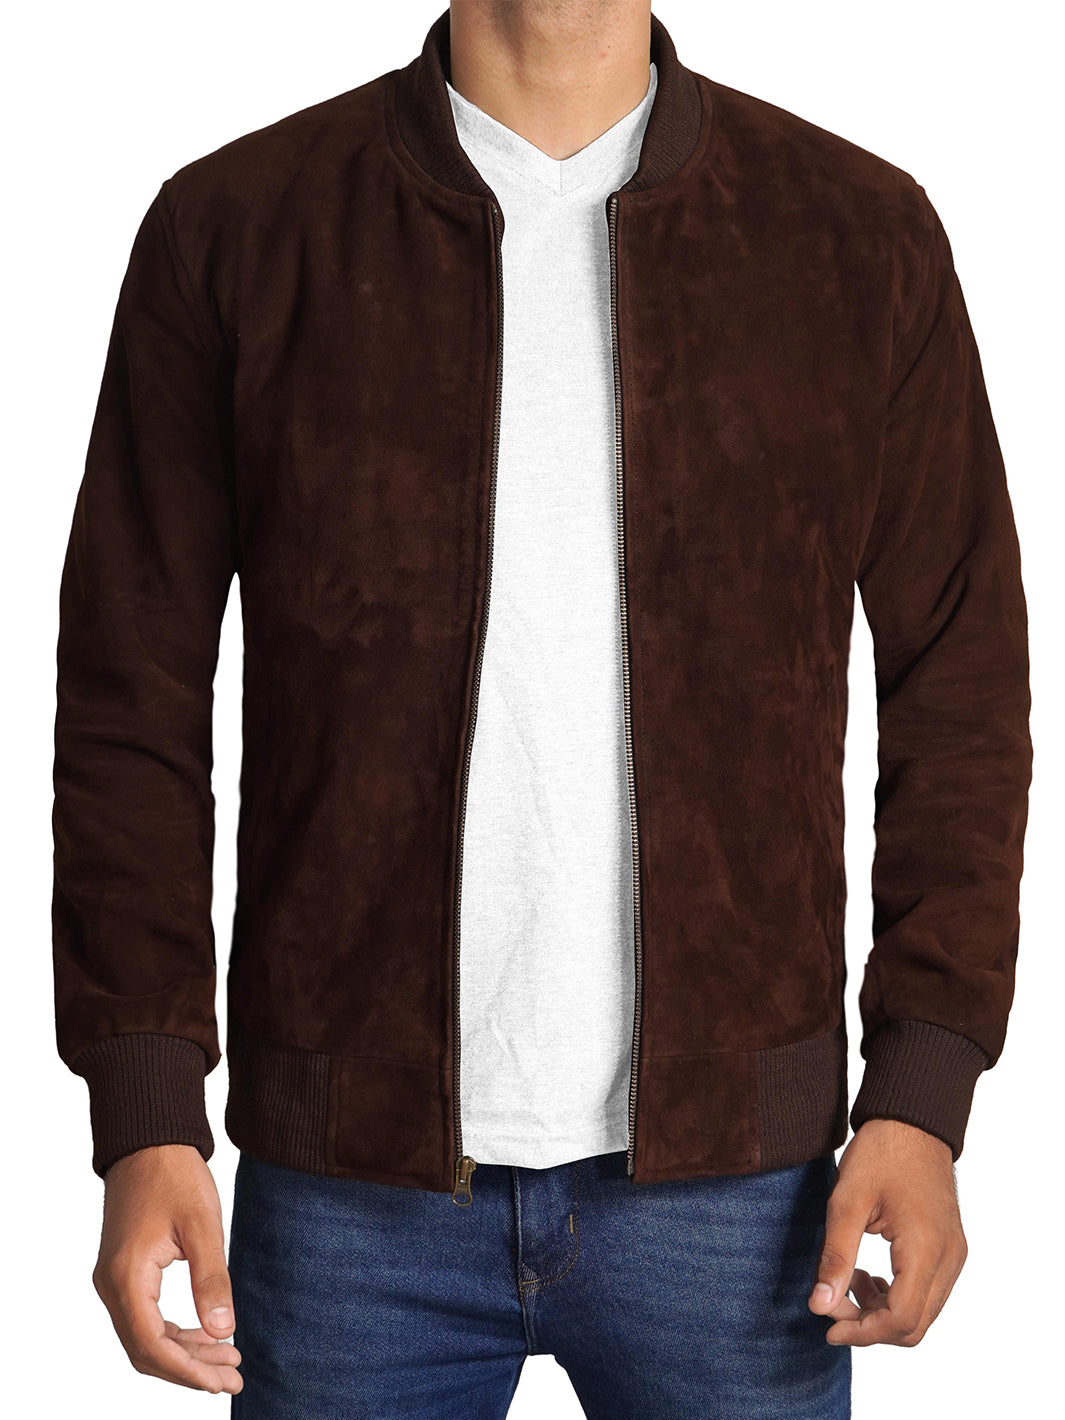 Mens Suede Real Leather Jacket